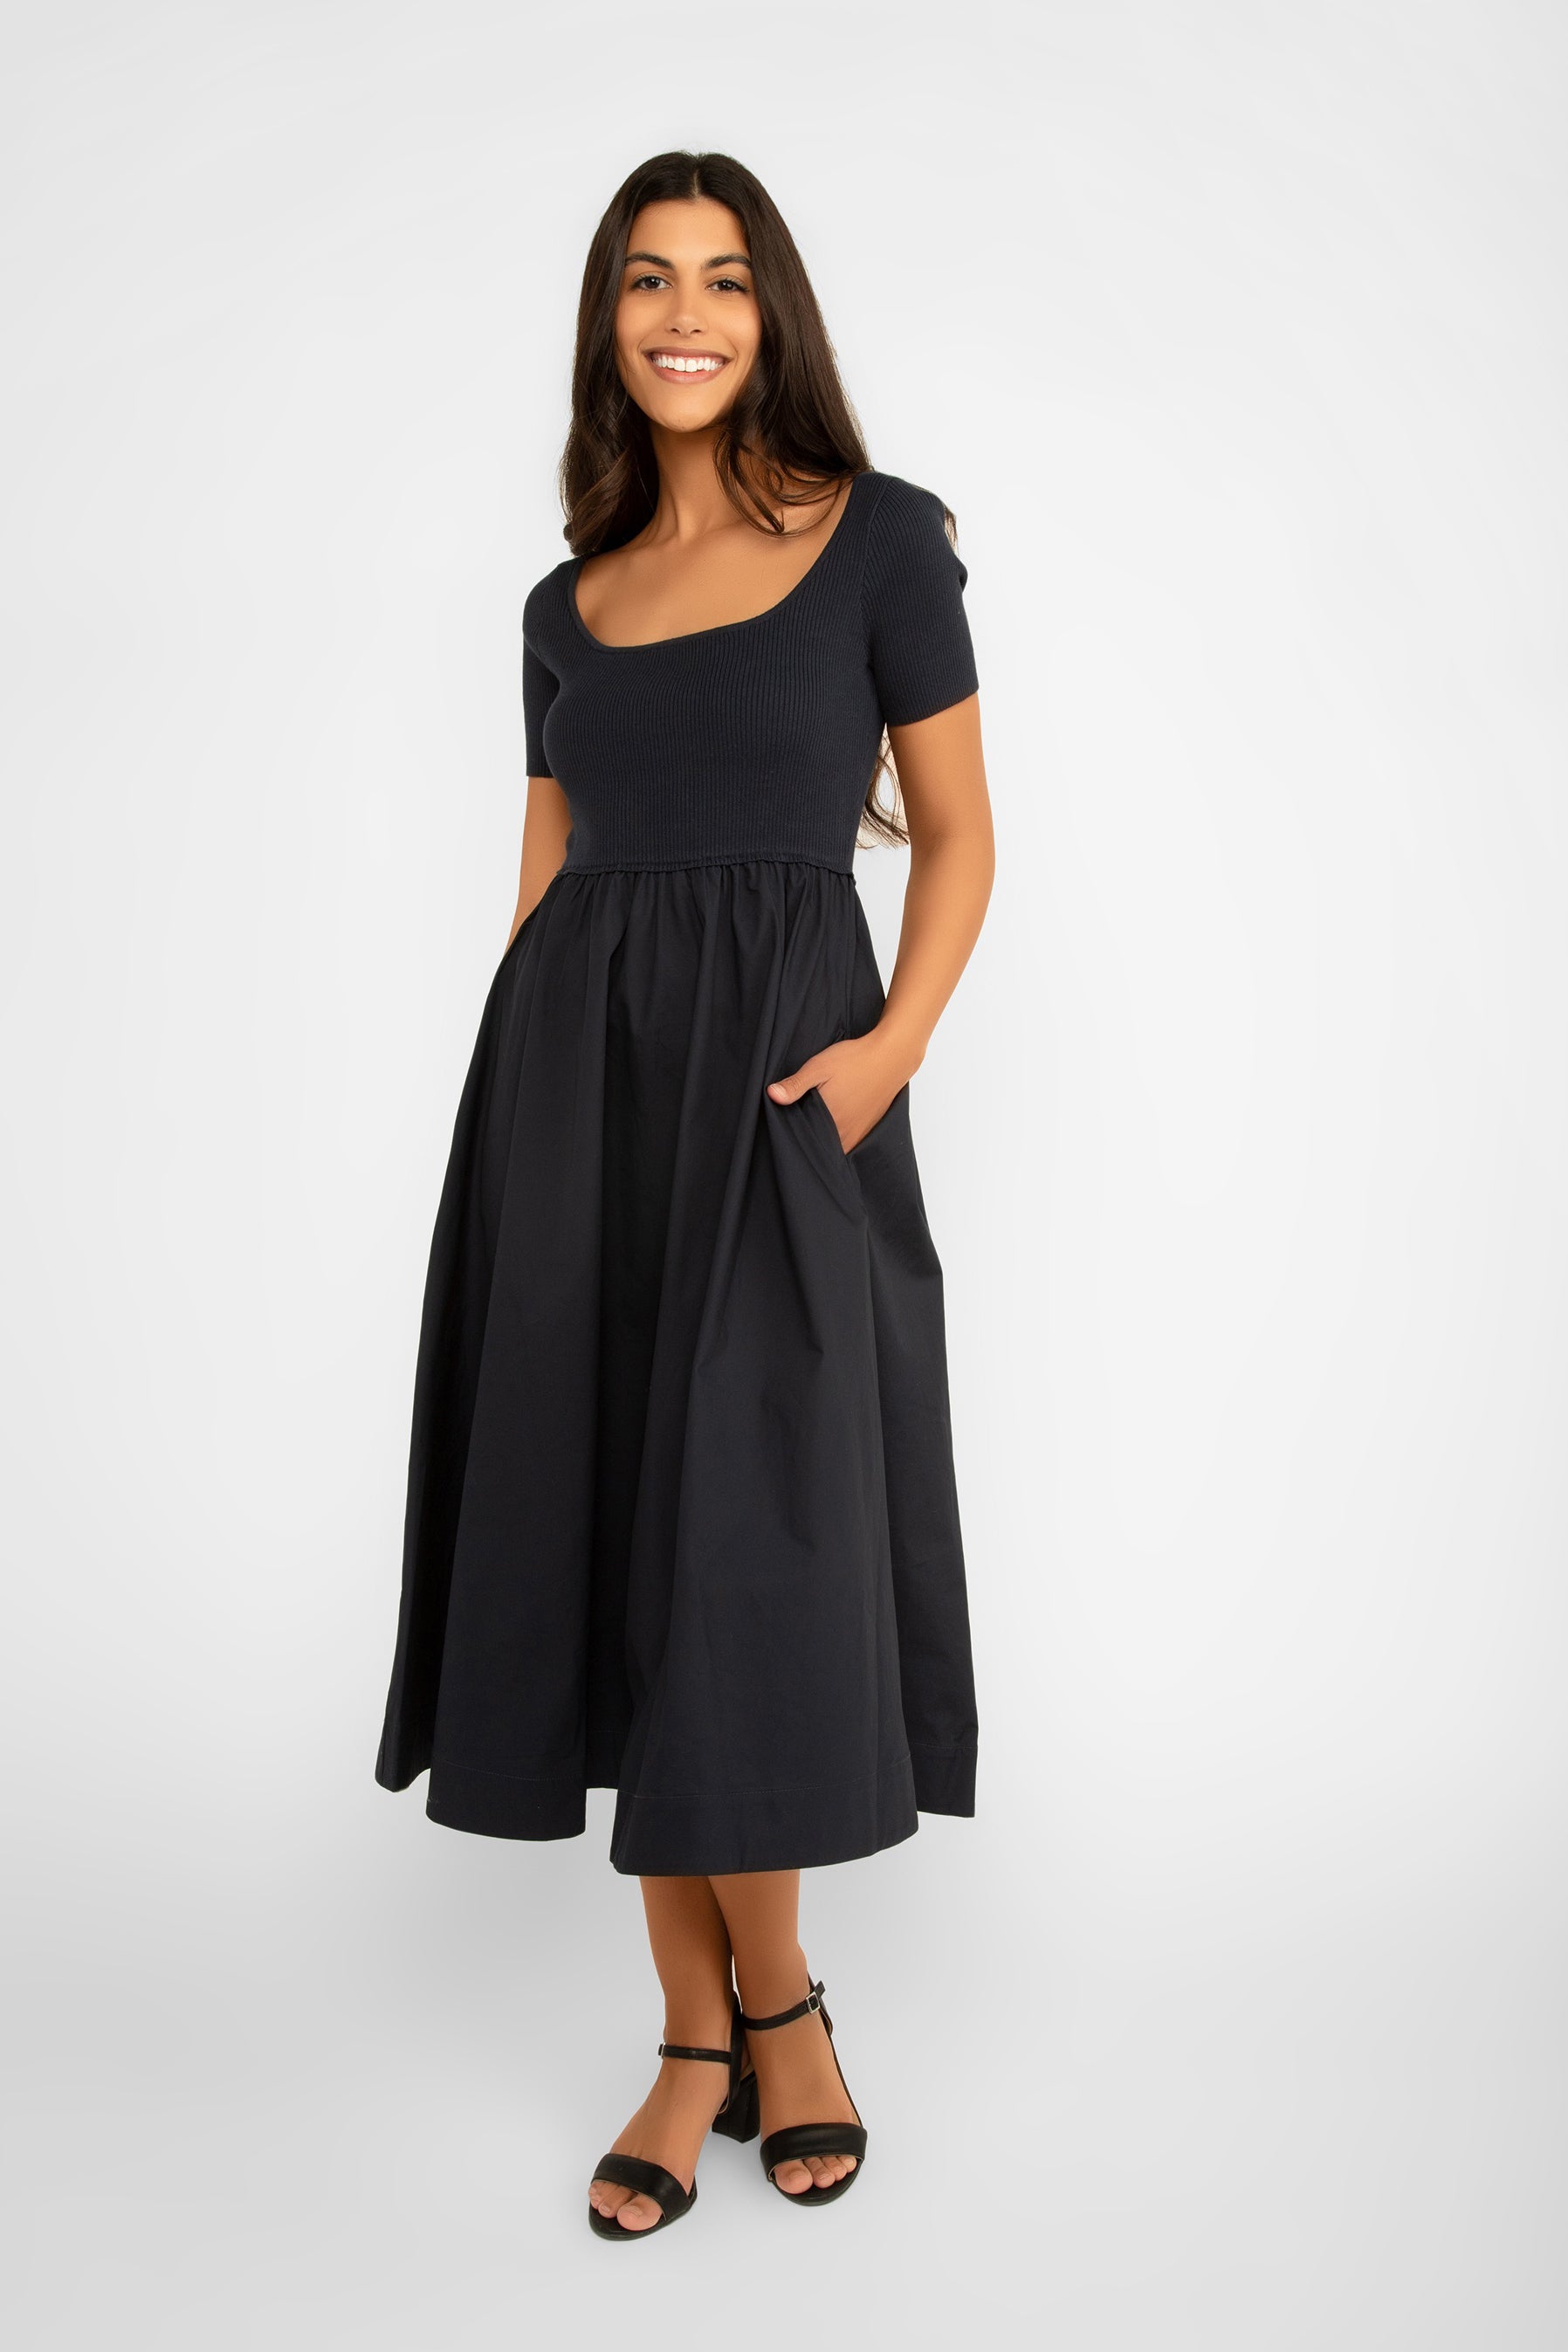 Lucy Paris (DR613) Women's Short Sleeve Scoop Neck A-Line Midi Dress with ribbed knit body and cotton skirt, in navy